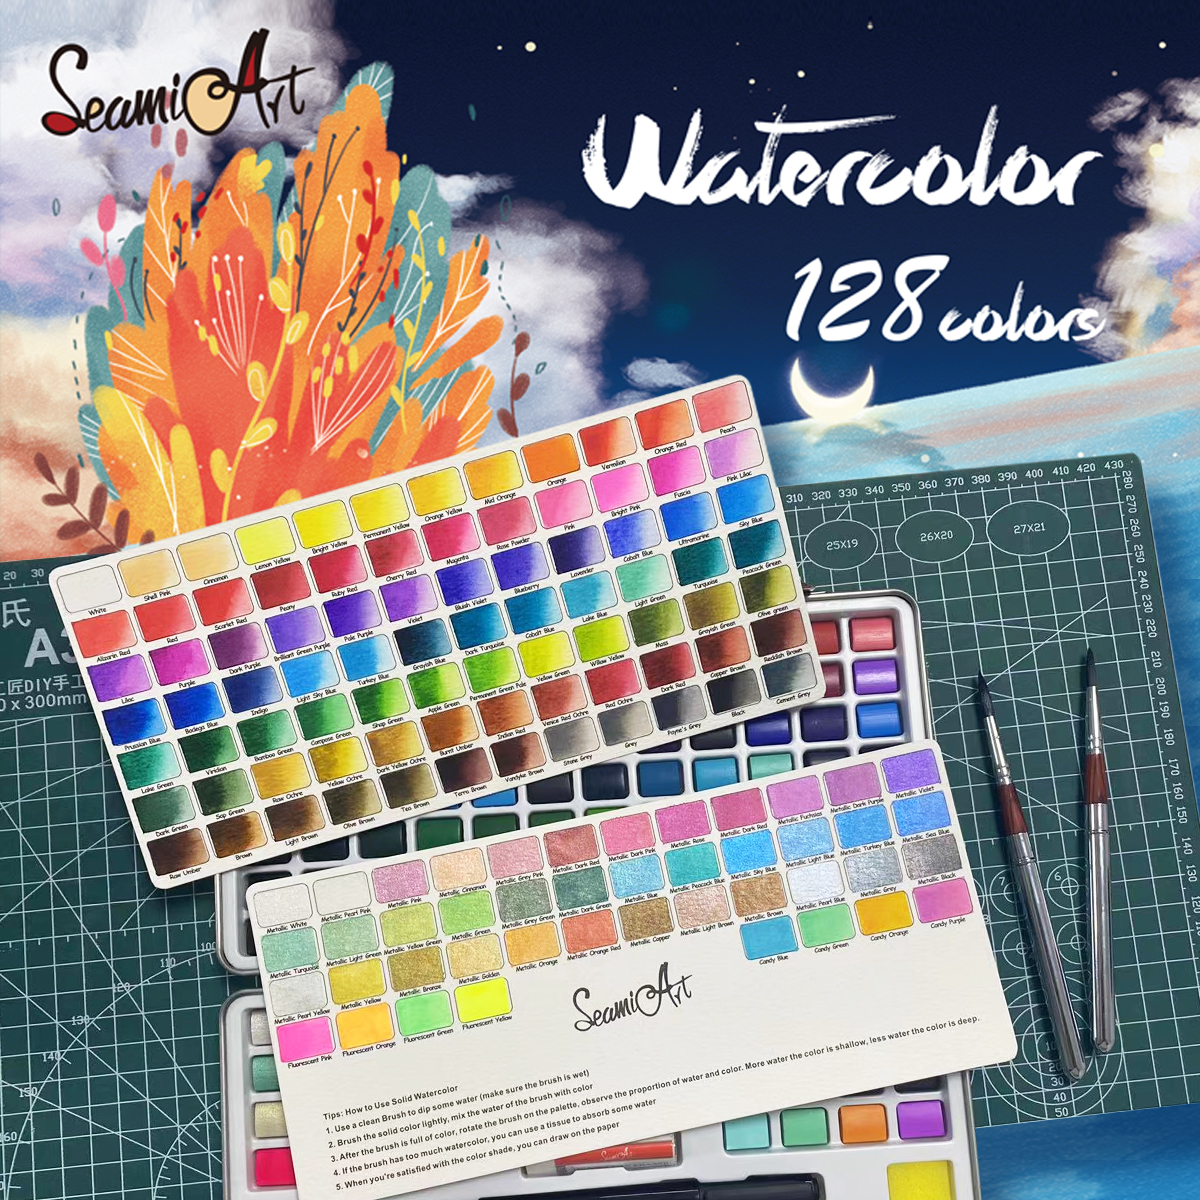 128 colors watercolor paint set, pearlescent & fluorescent colors, all-in-one watercolor kit